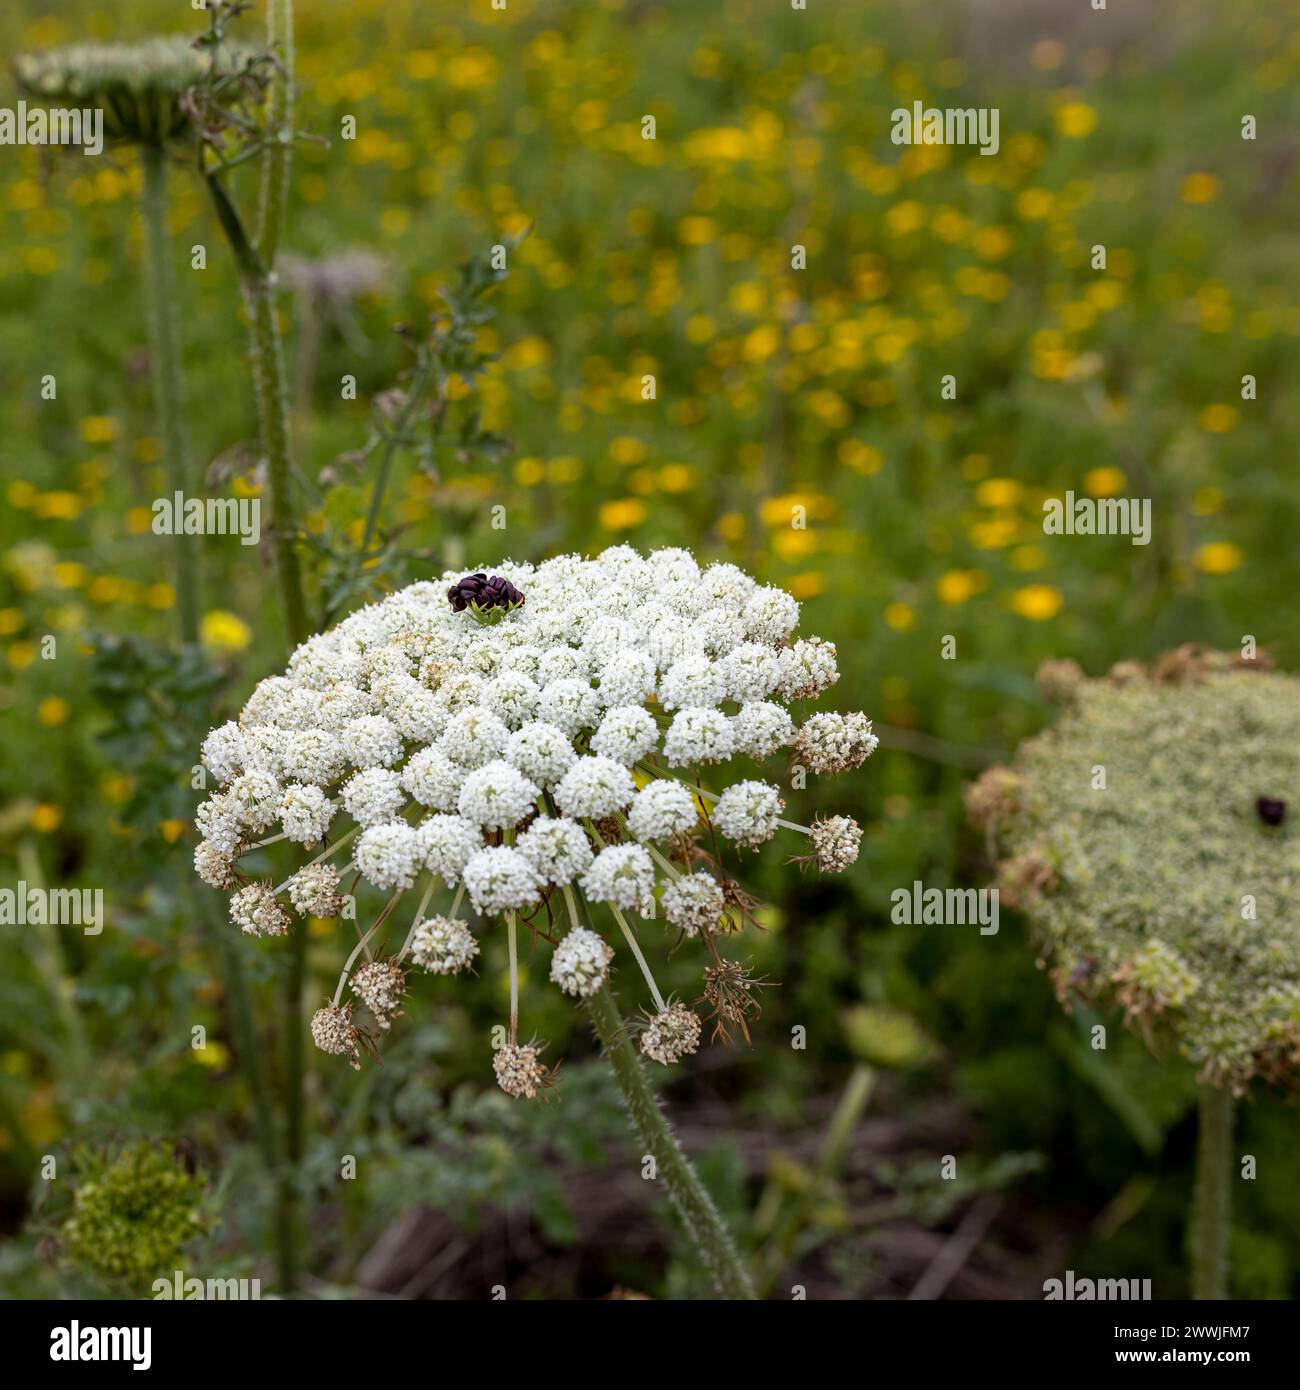 Daucus carota, whose common names include wild carrot, European wild carrot, bird's nest, bishop's lace, and Queen Anne's lace, is a flowering plant i Stock Photo